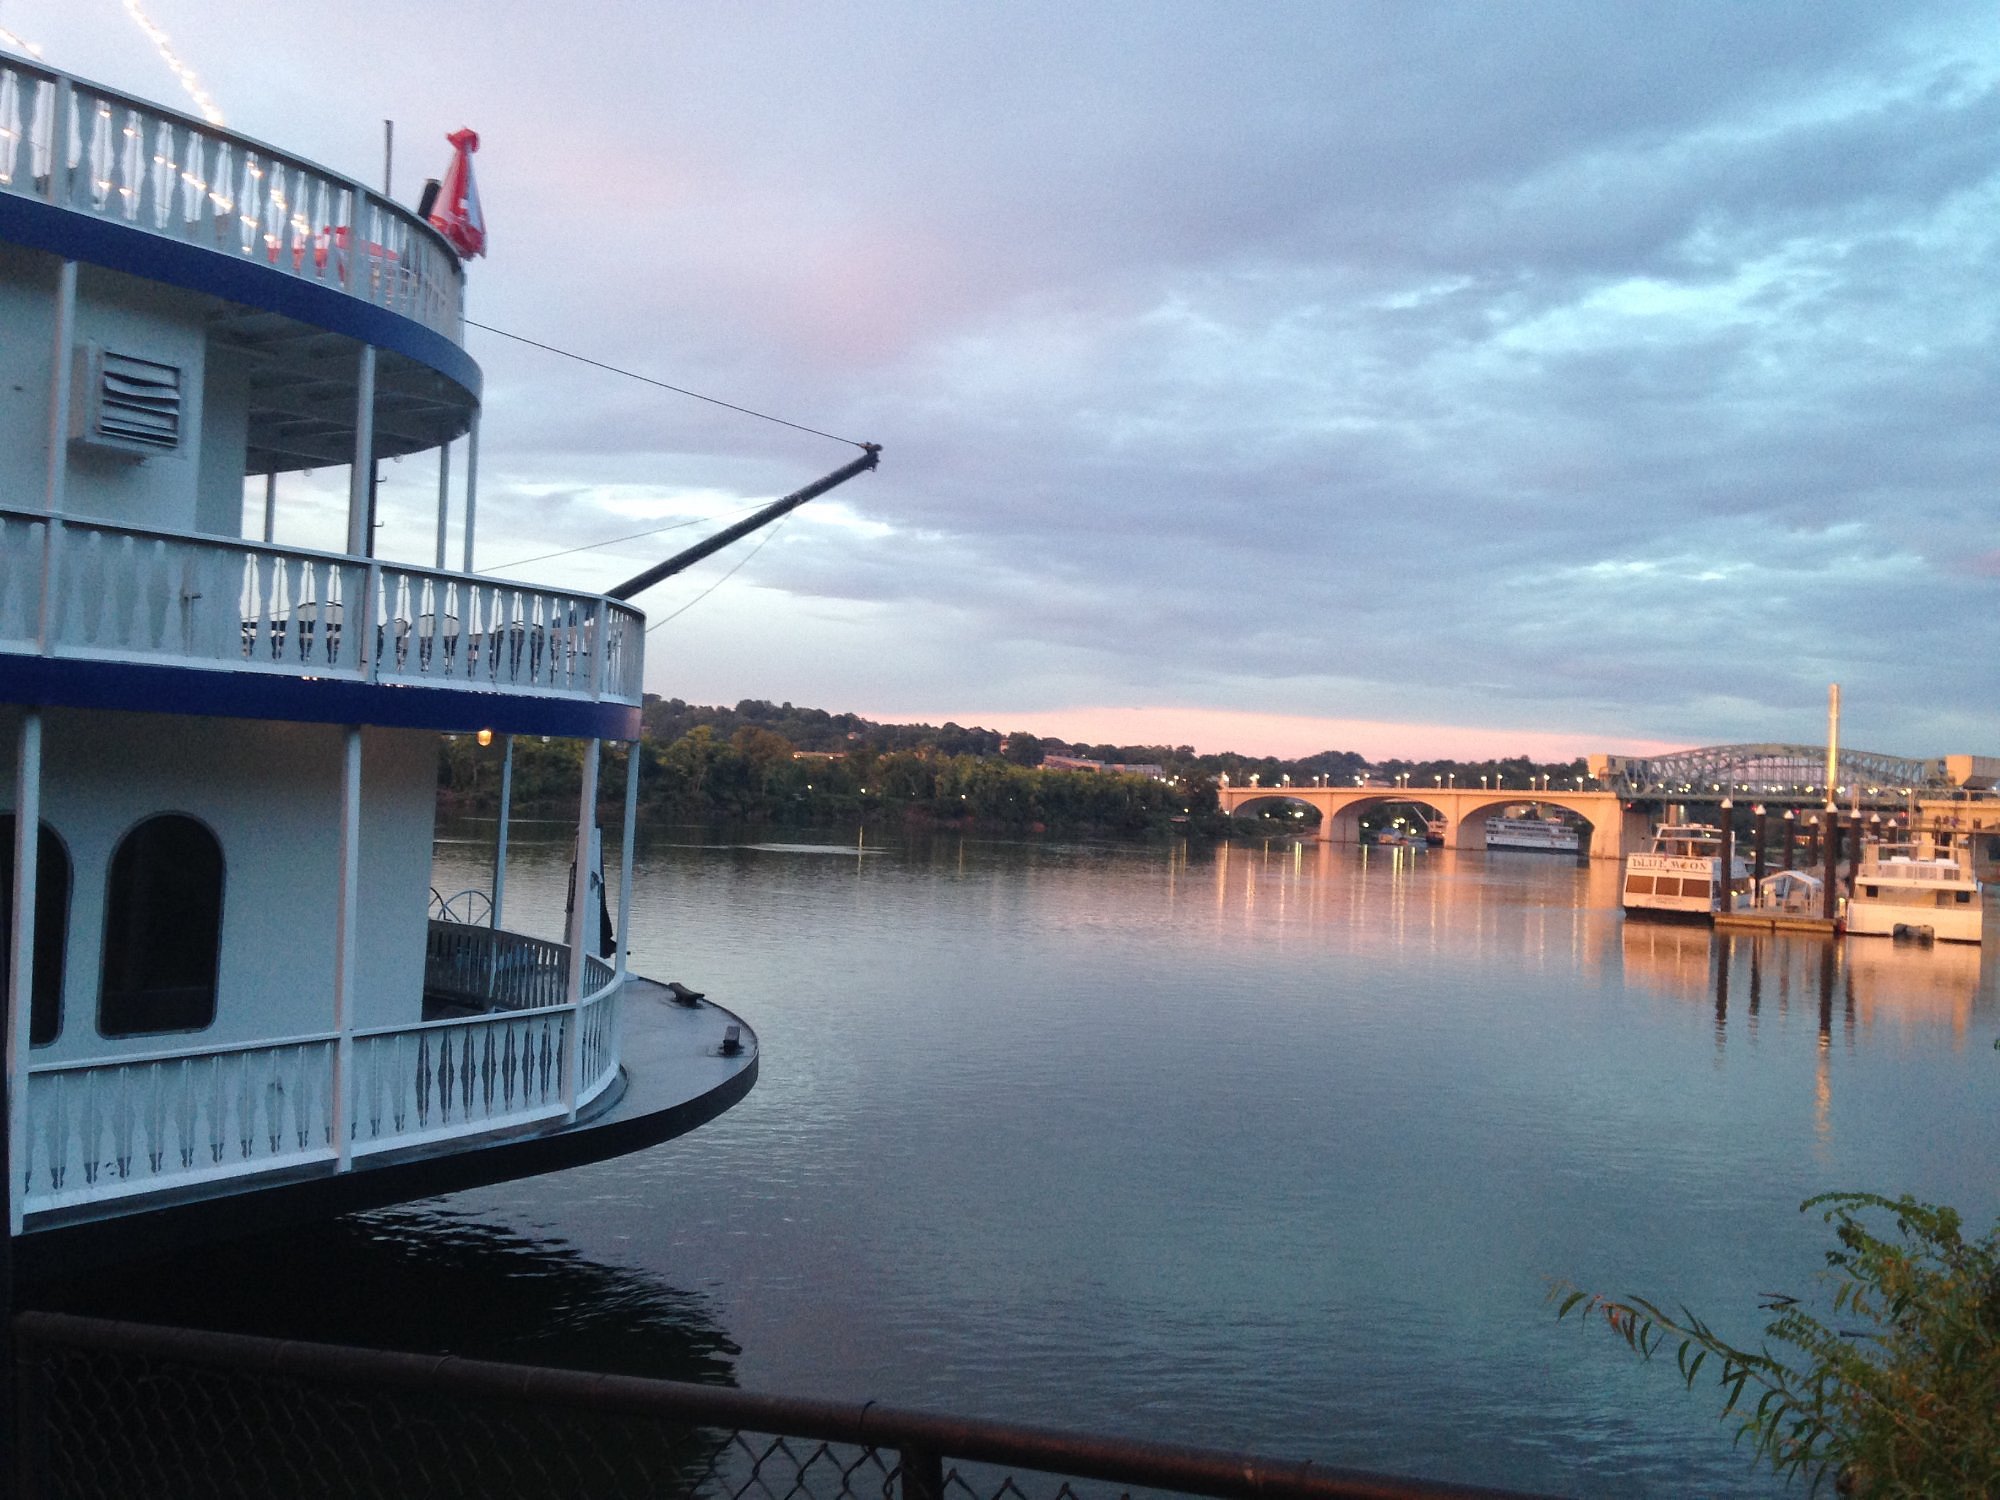 southern belle riverboat tours